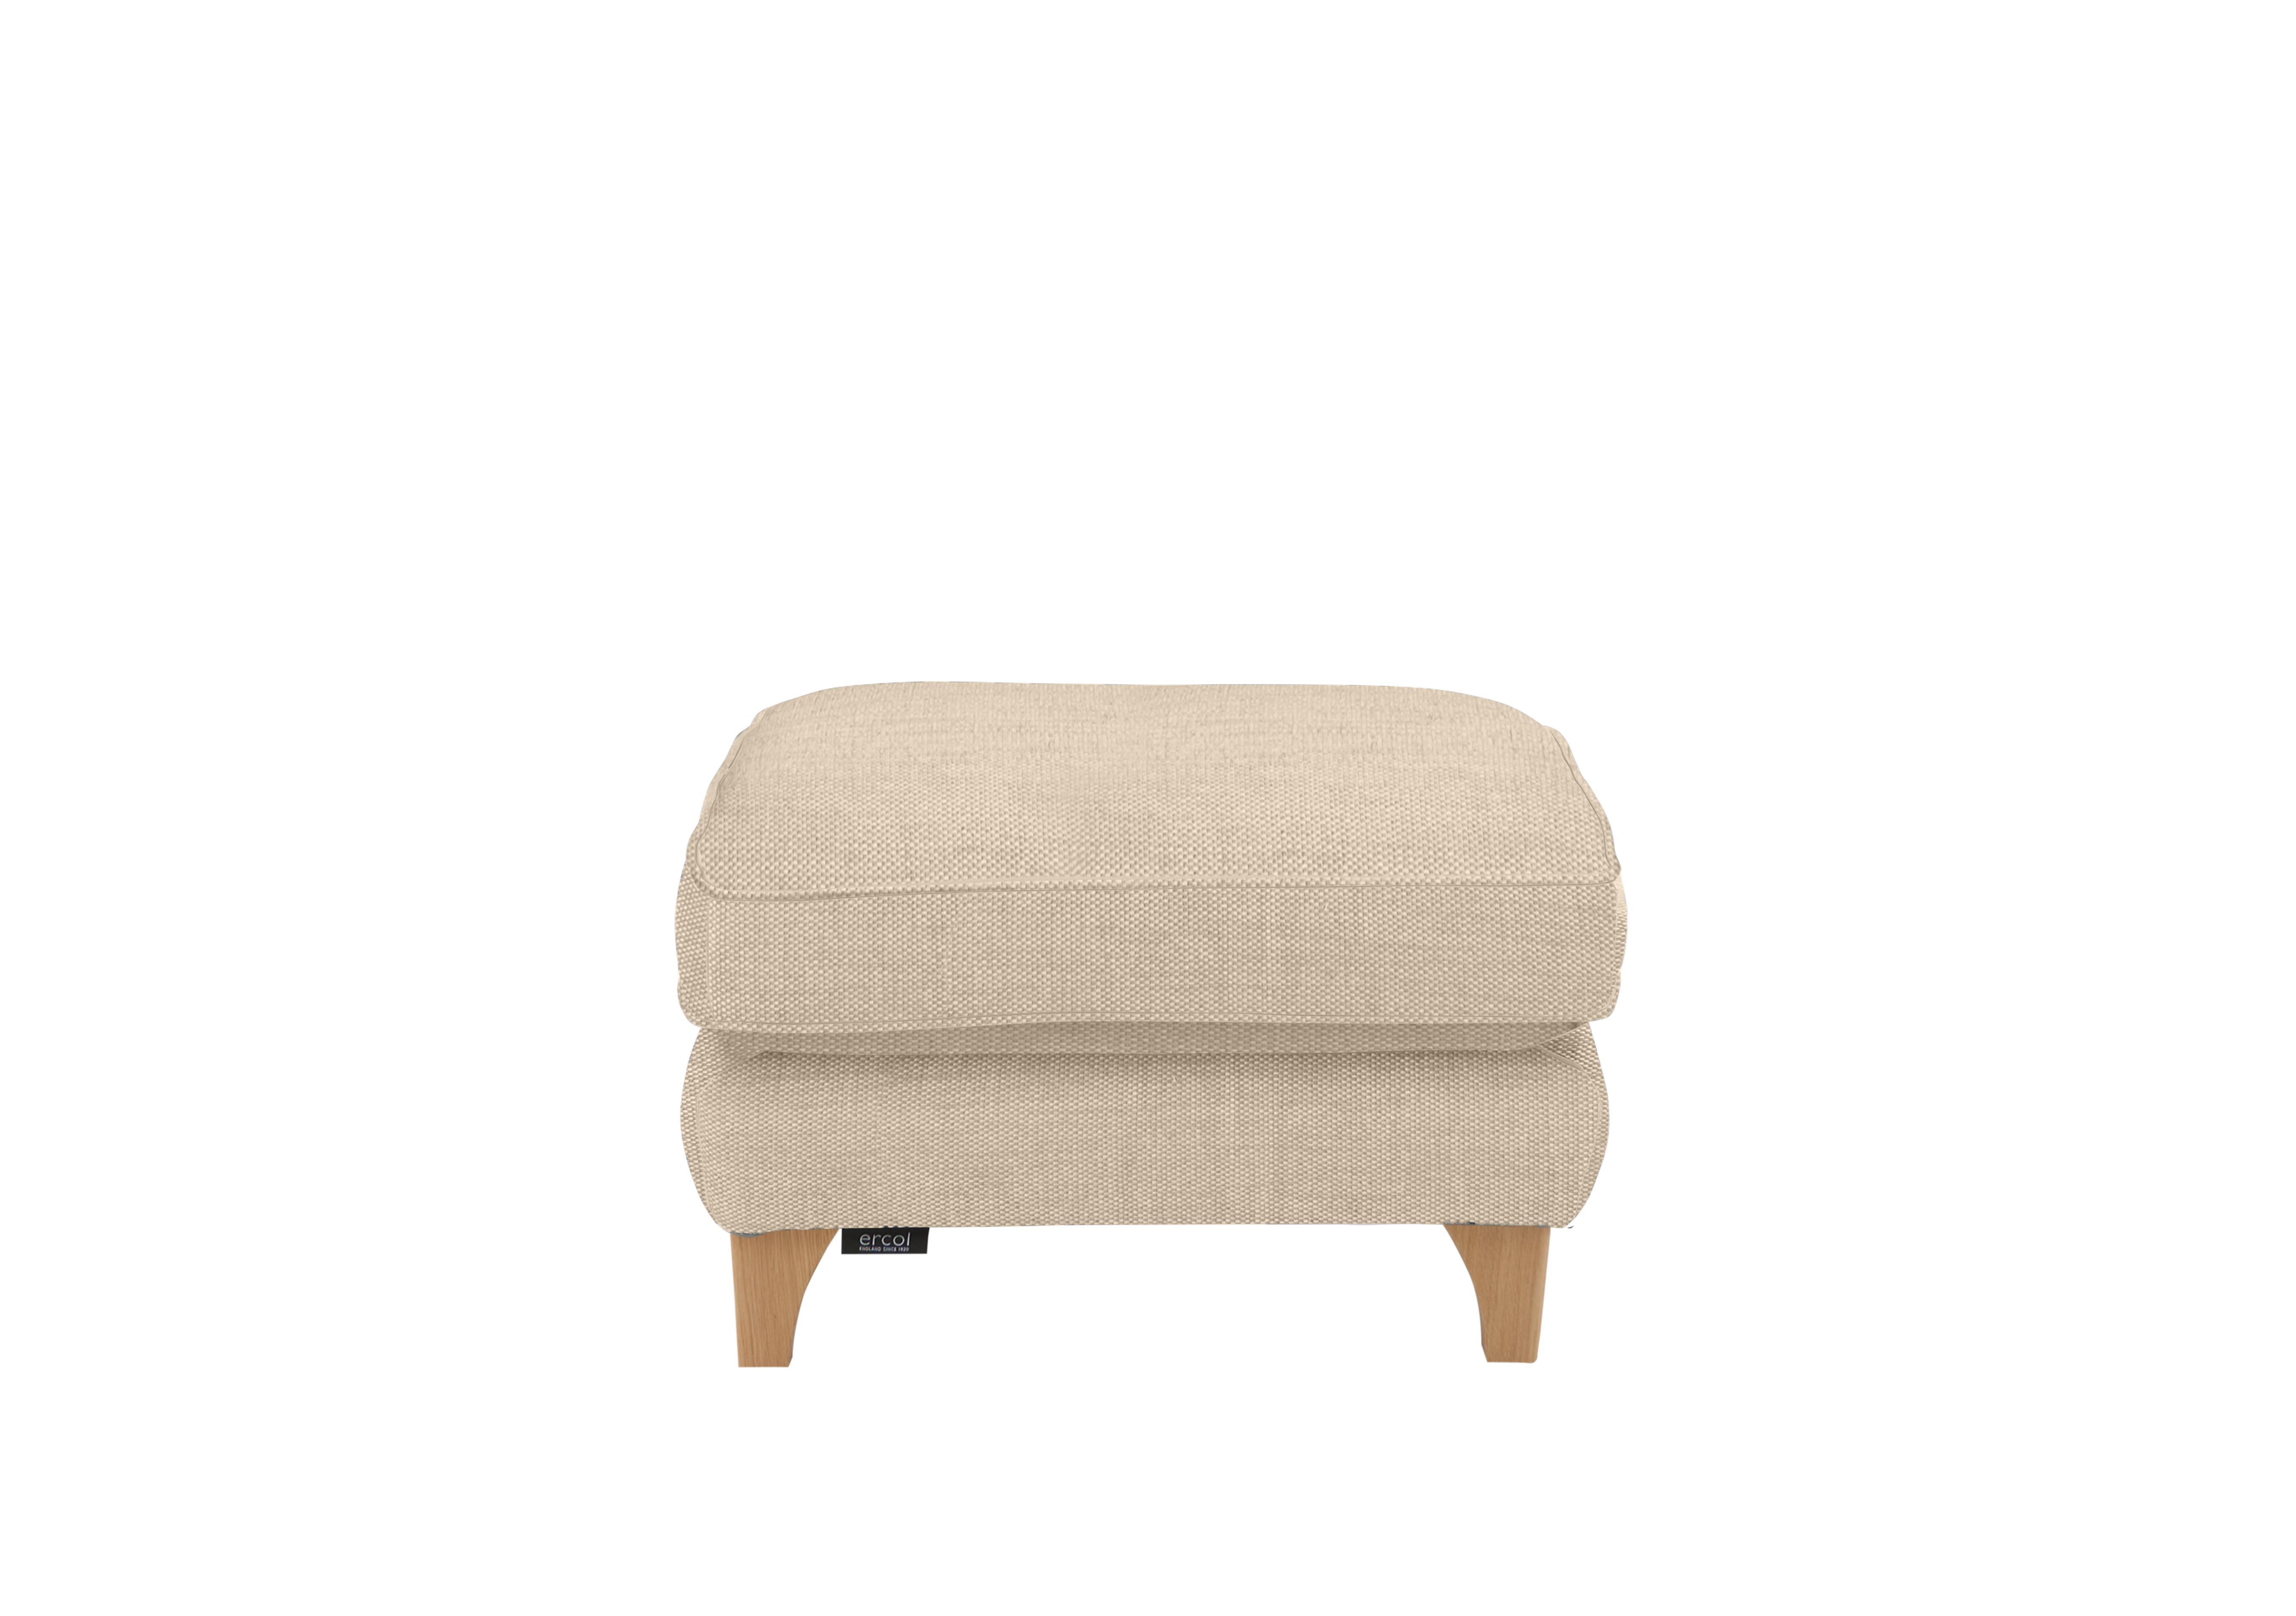 Enna Fabric Footstool in P214 on Furniture Village